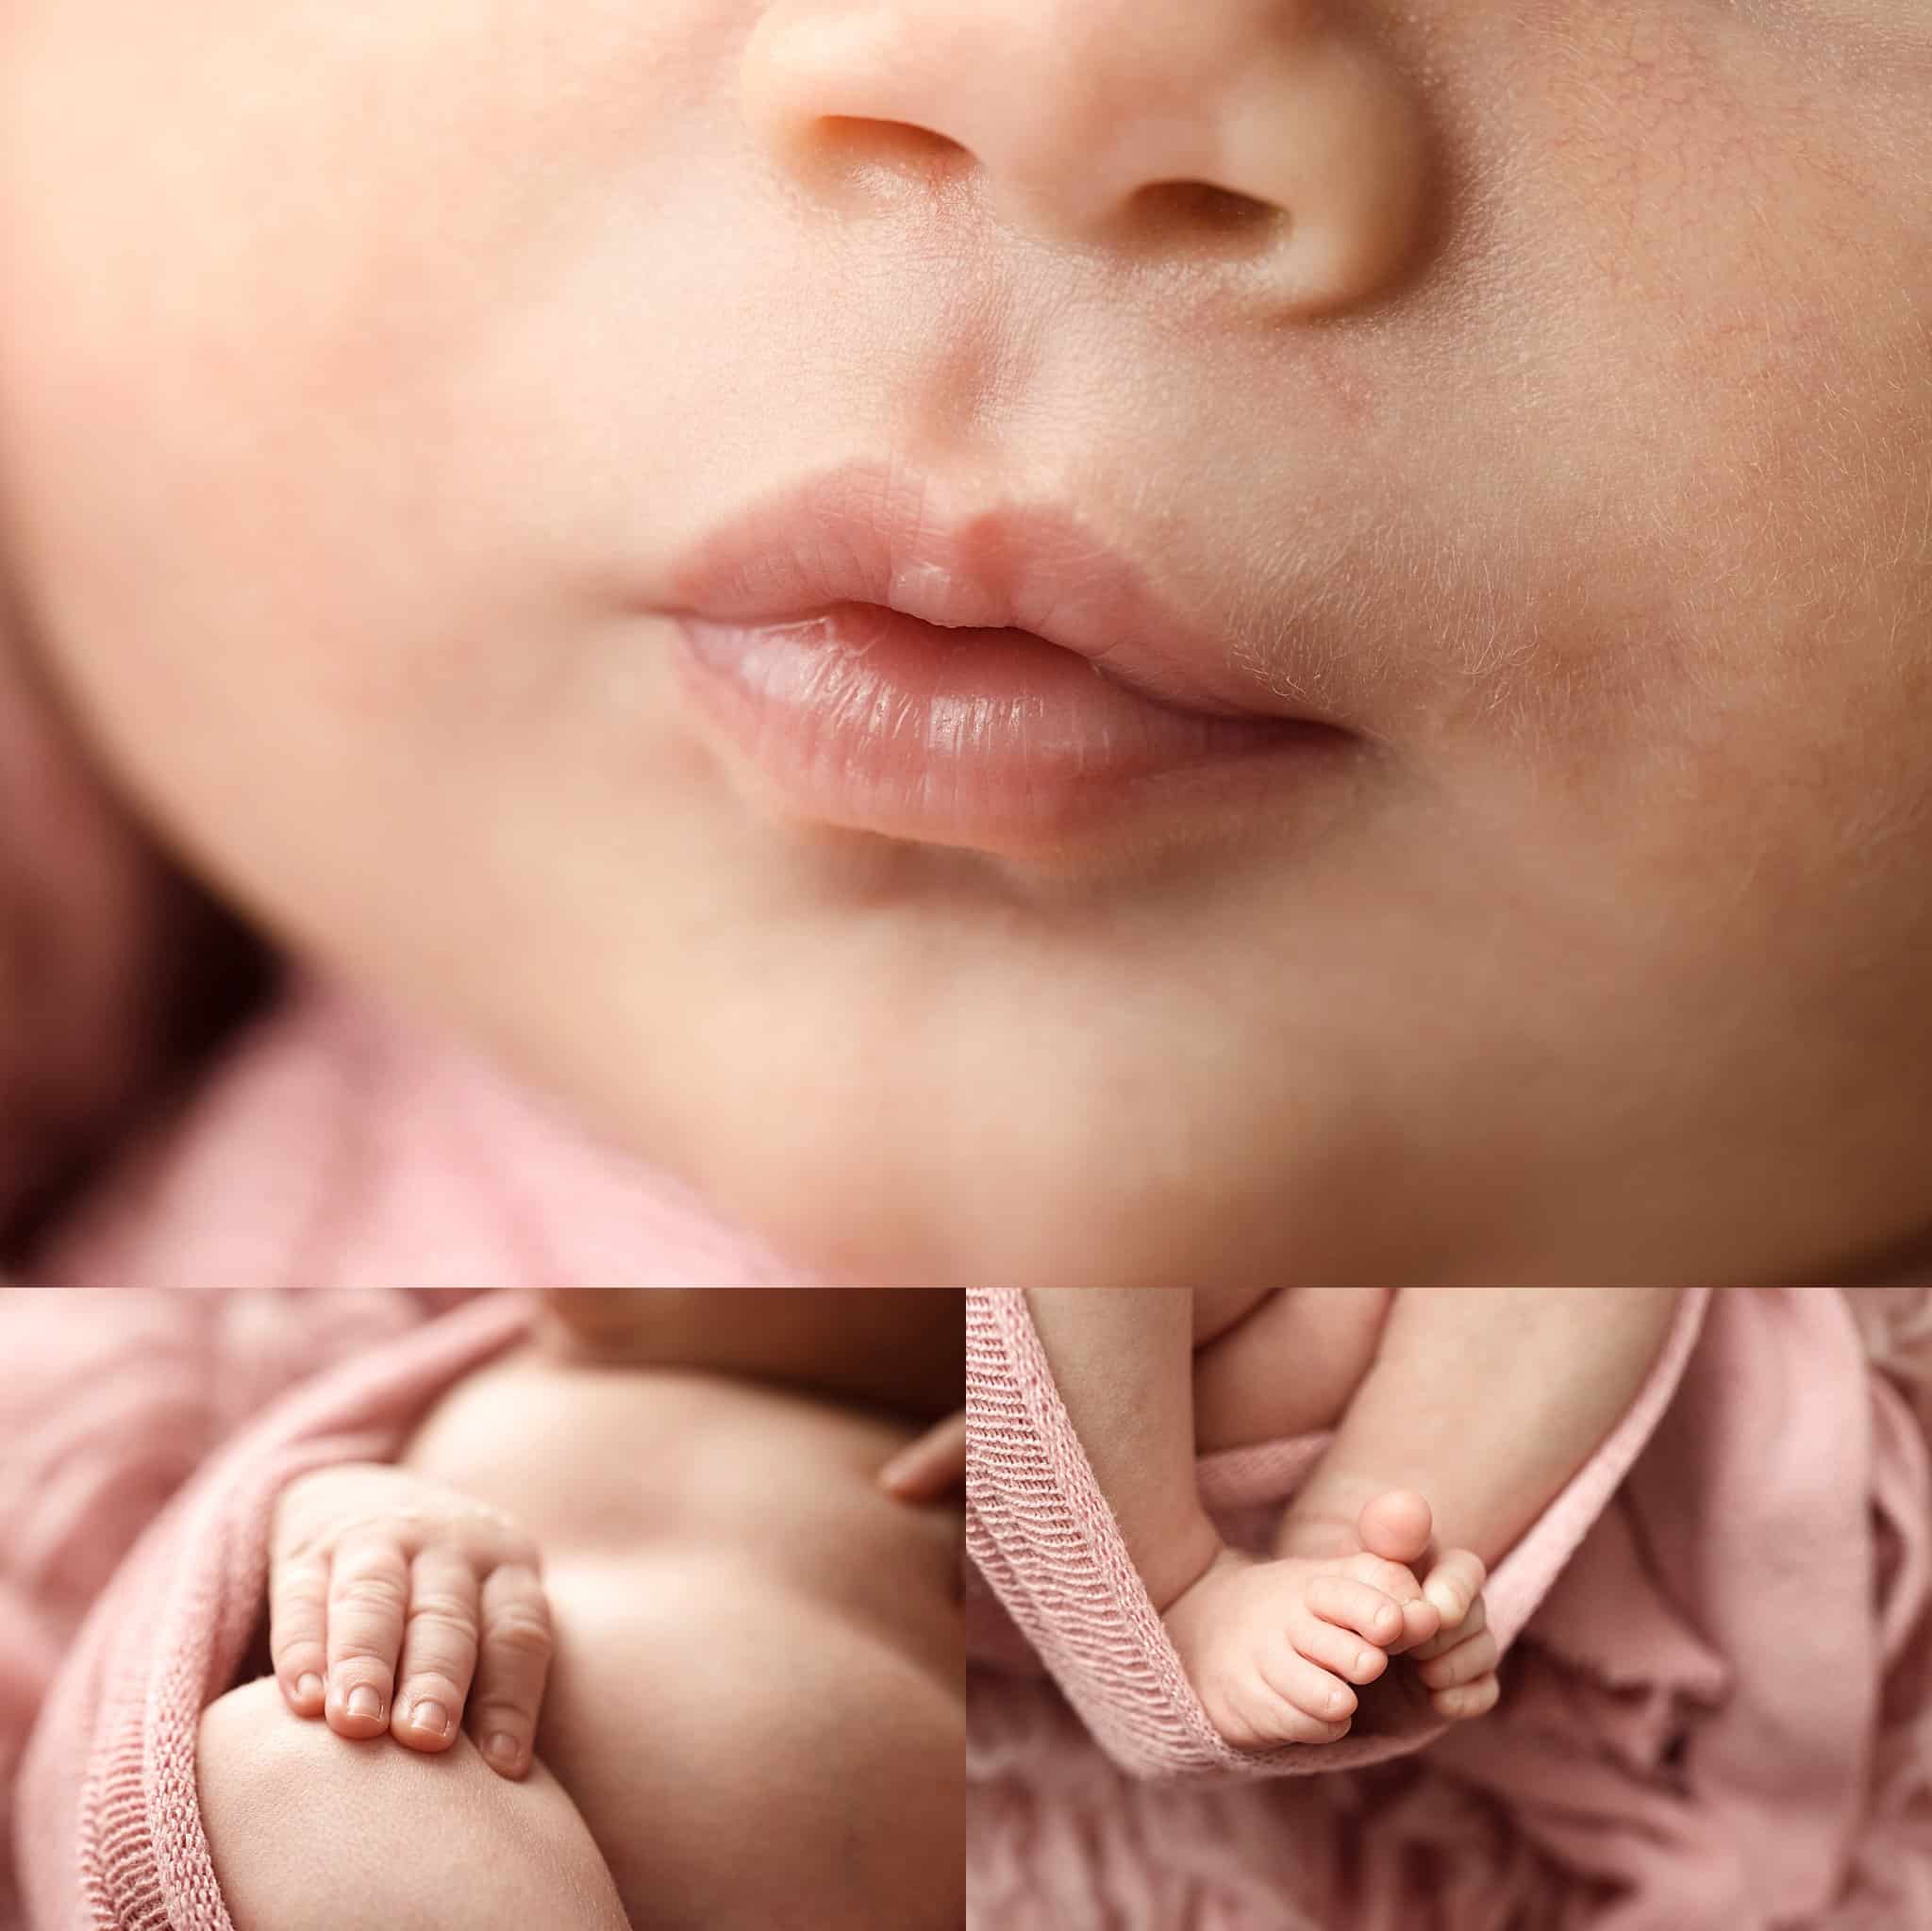 close up photo of baby details